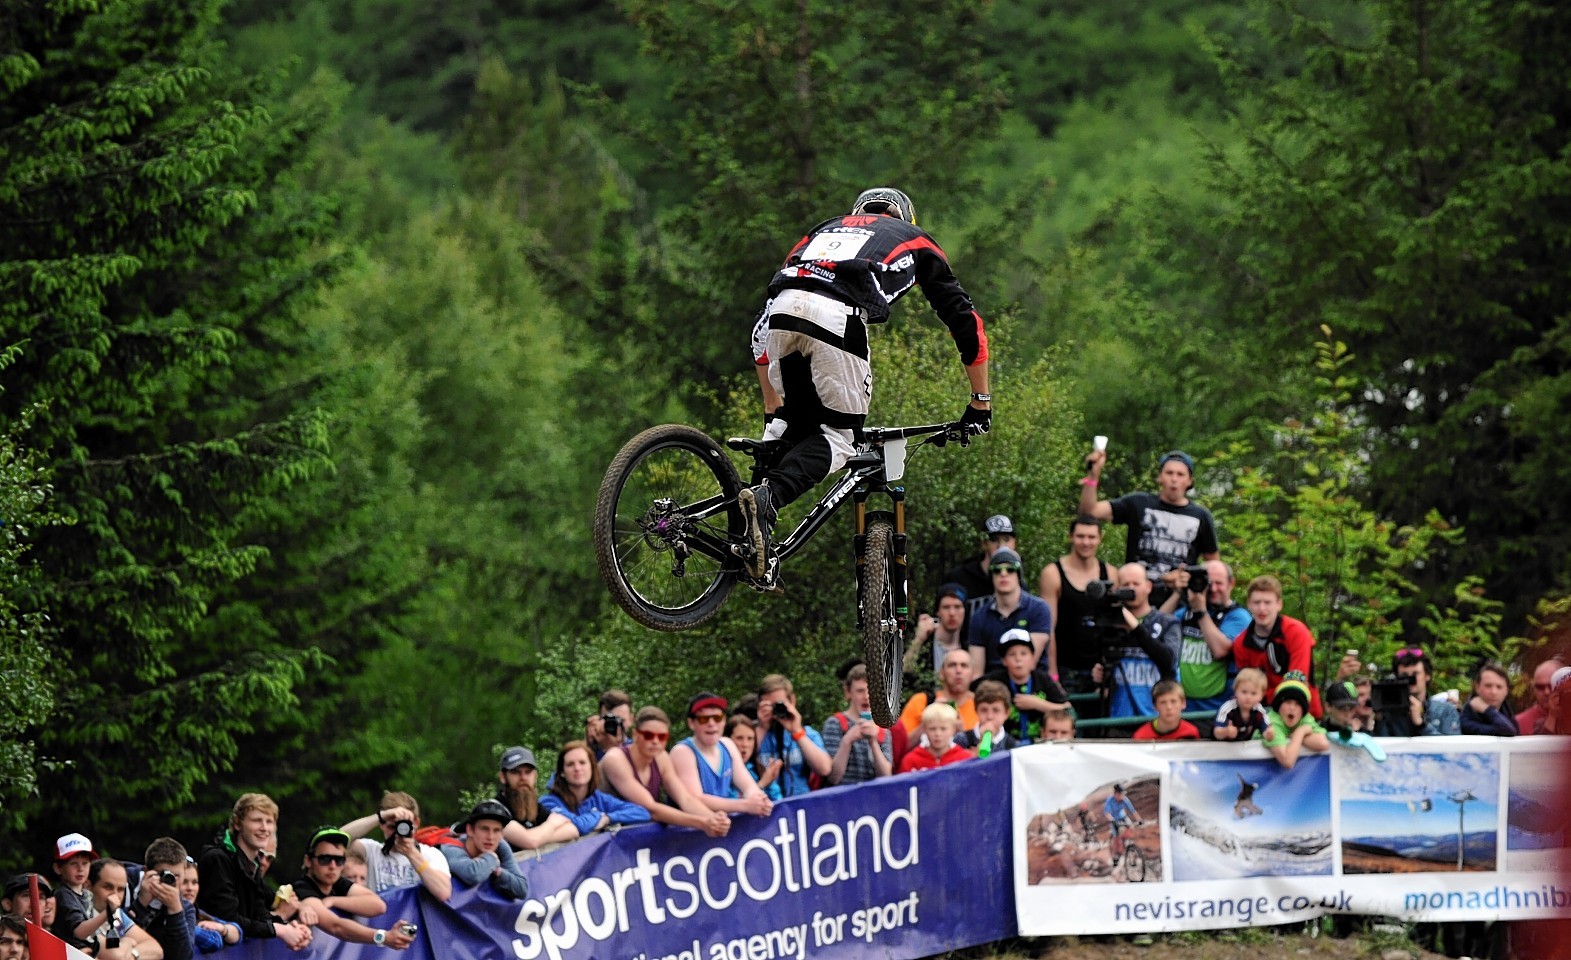 World Mountain Bike Downhill Championship 2014 at Fort William could benefit from the changes